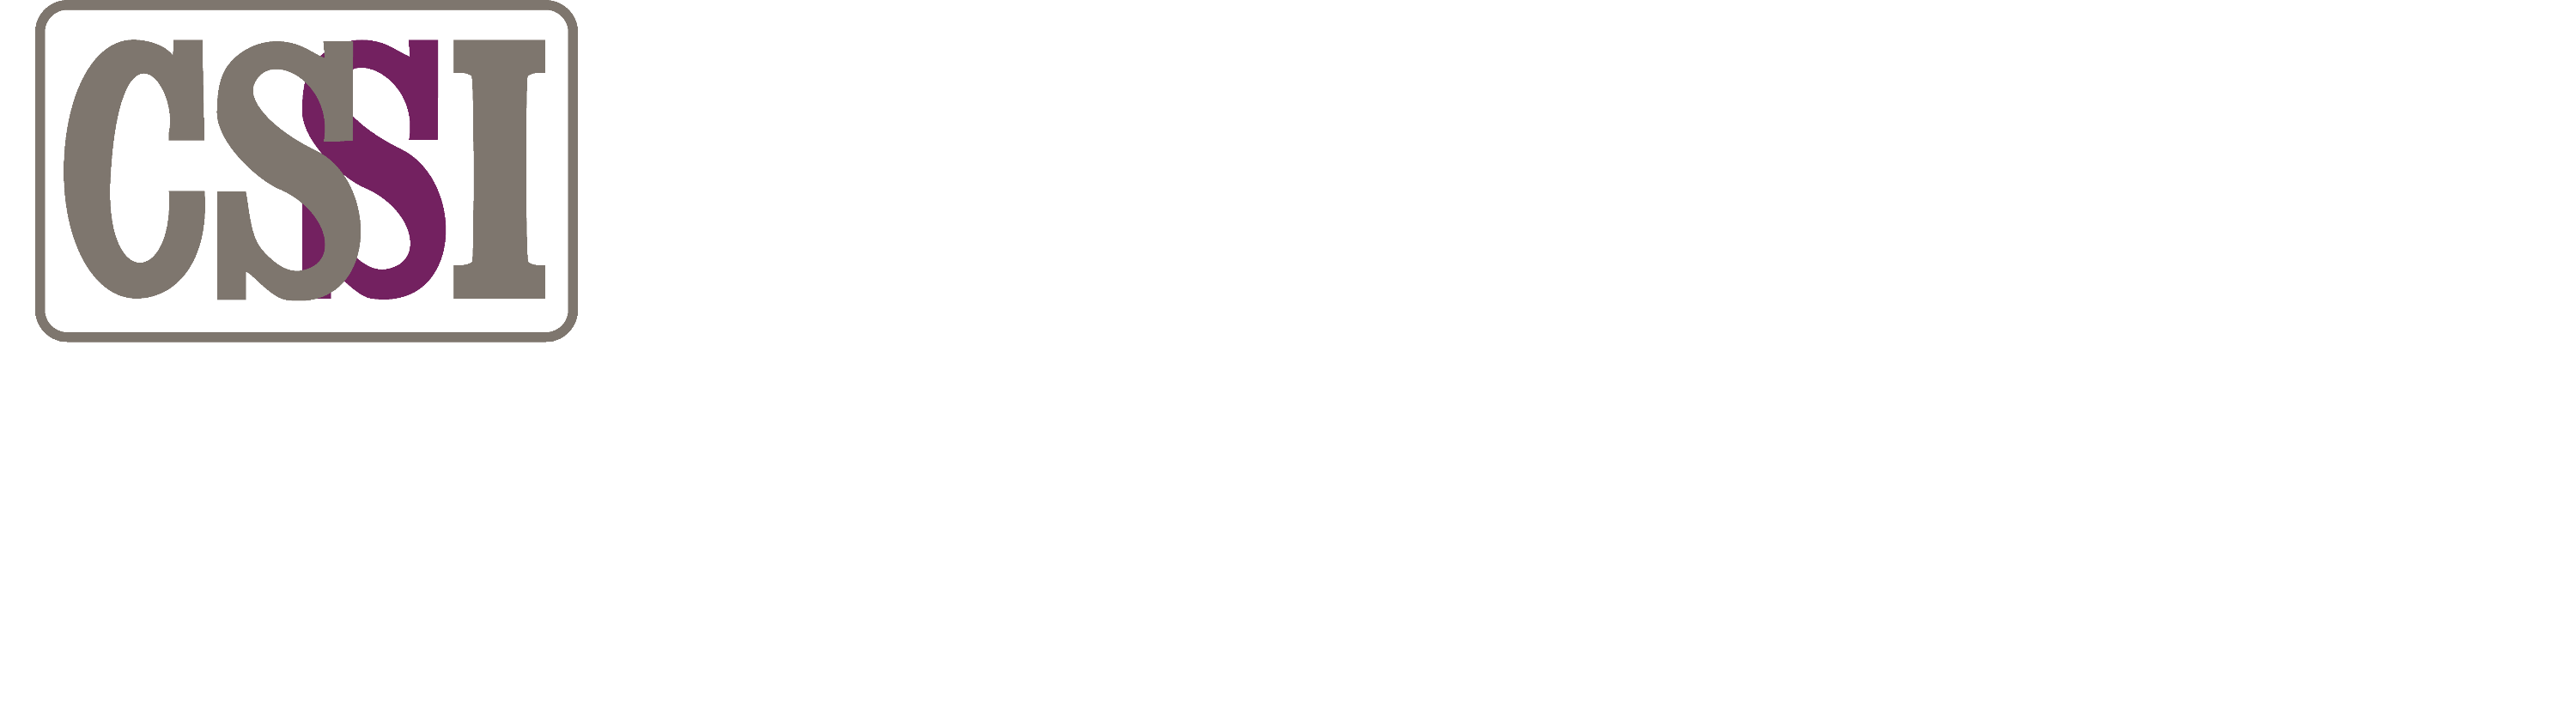 Construction Systems Software, Inc.